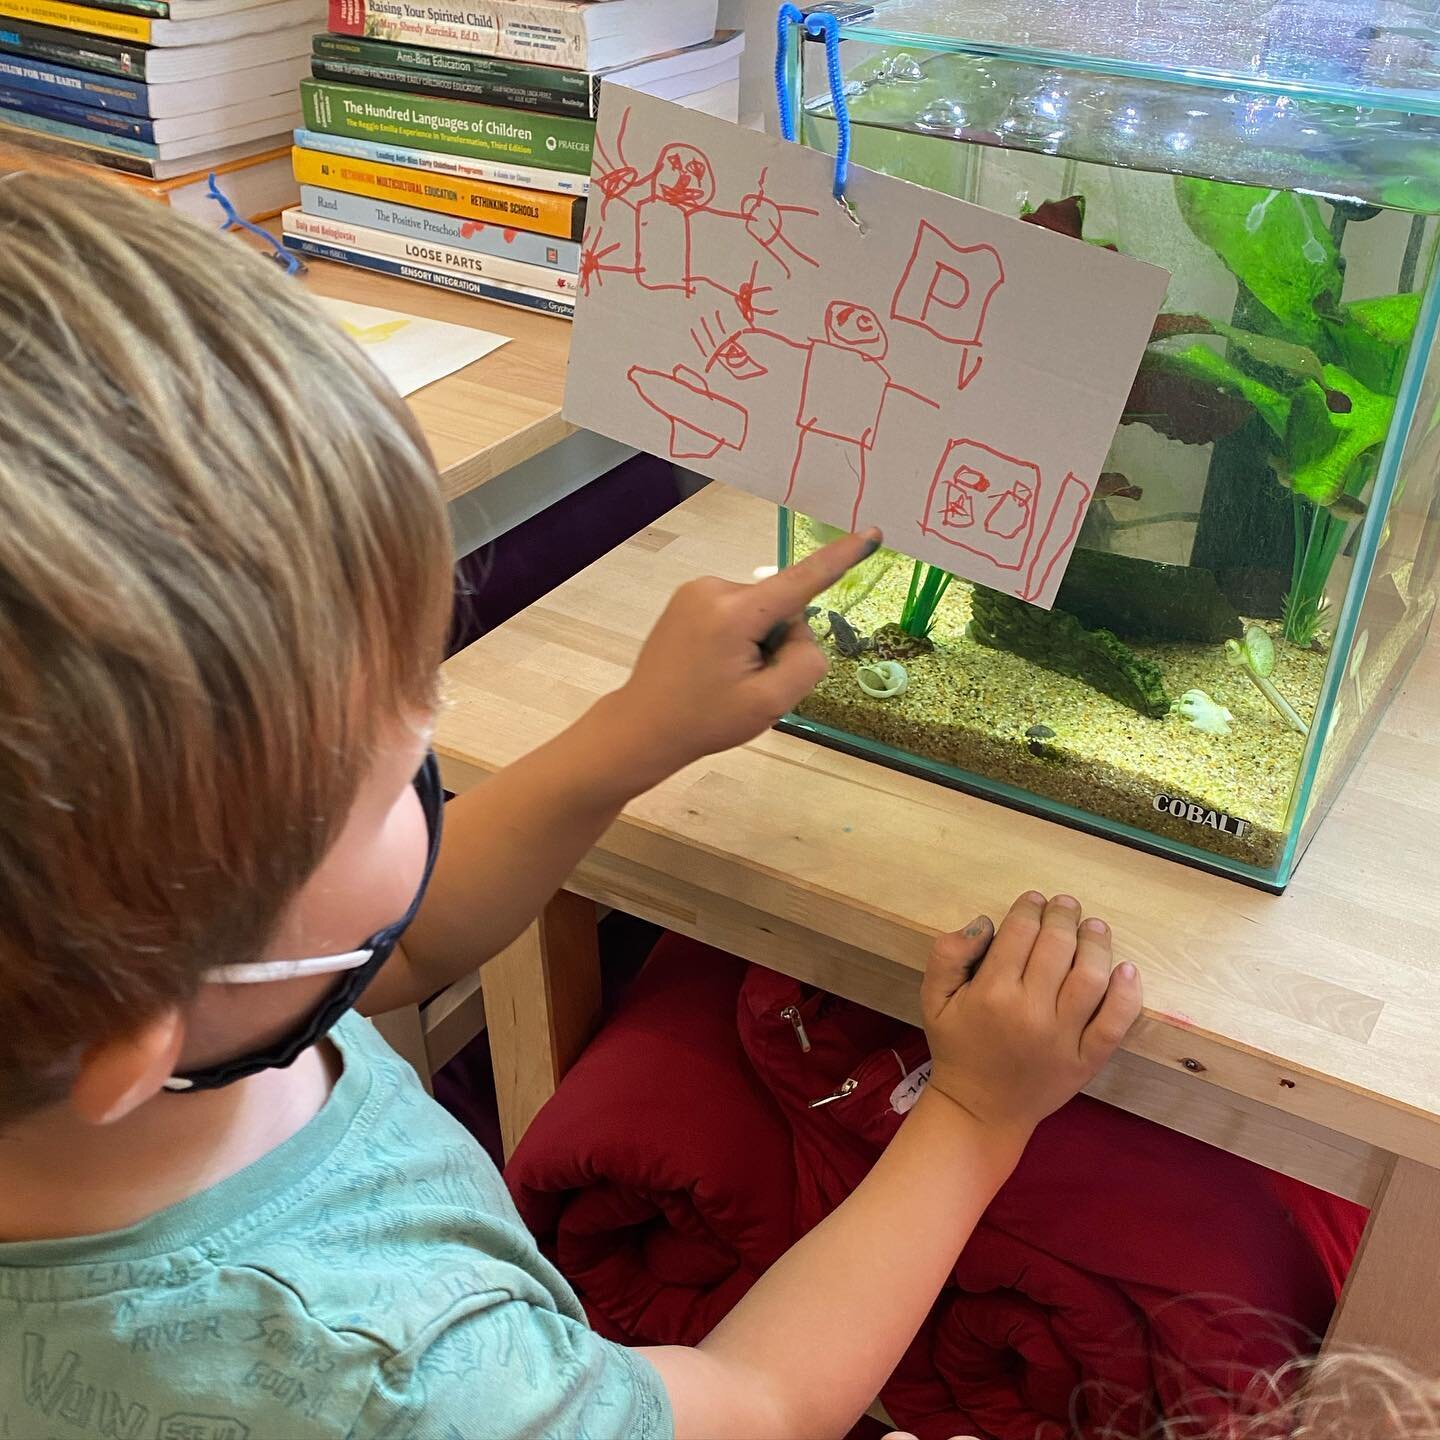 Frog Mystery Part 2: Later in the day, Milo noticed &quot;something white floating&quot; in the aquarium and called me over. We found what looked to be the translucent whitish membrane of a frog (Mary and Todd suggested it looked like a ghost frog). 